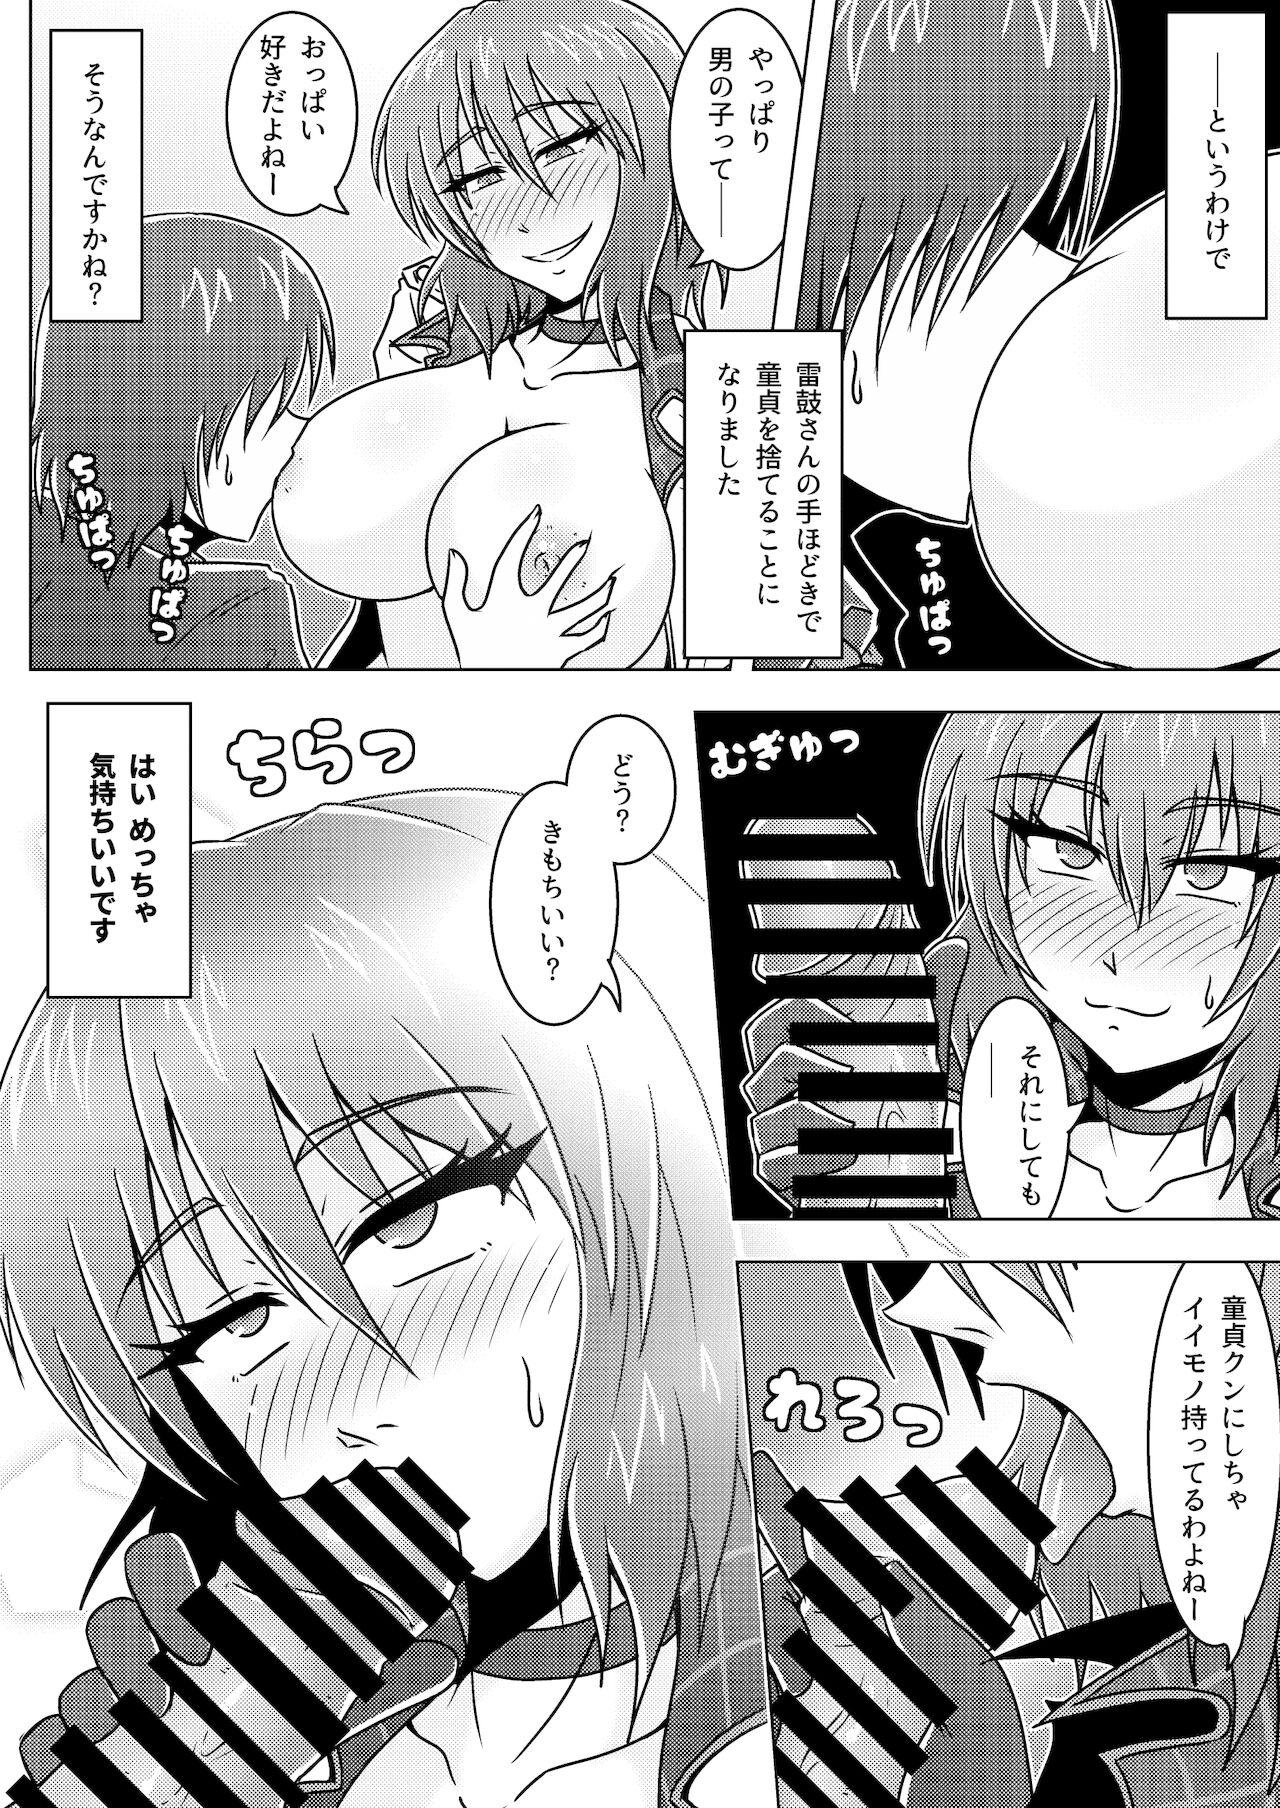 Culote 雷鼓さんはお酒を控えない - Touhou project Girl Sucking Dick - Page 3